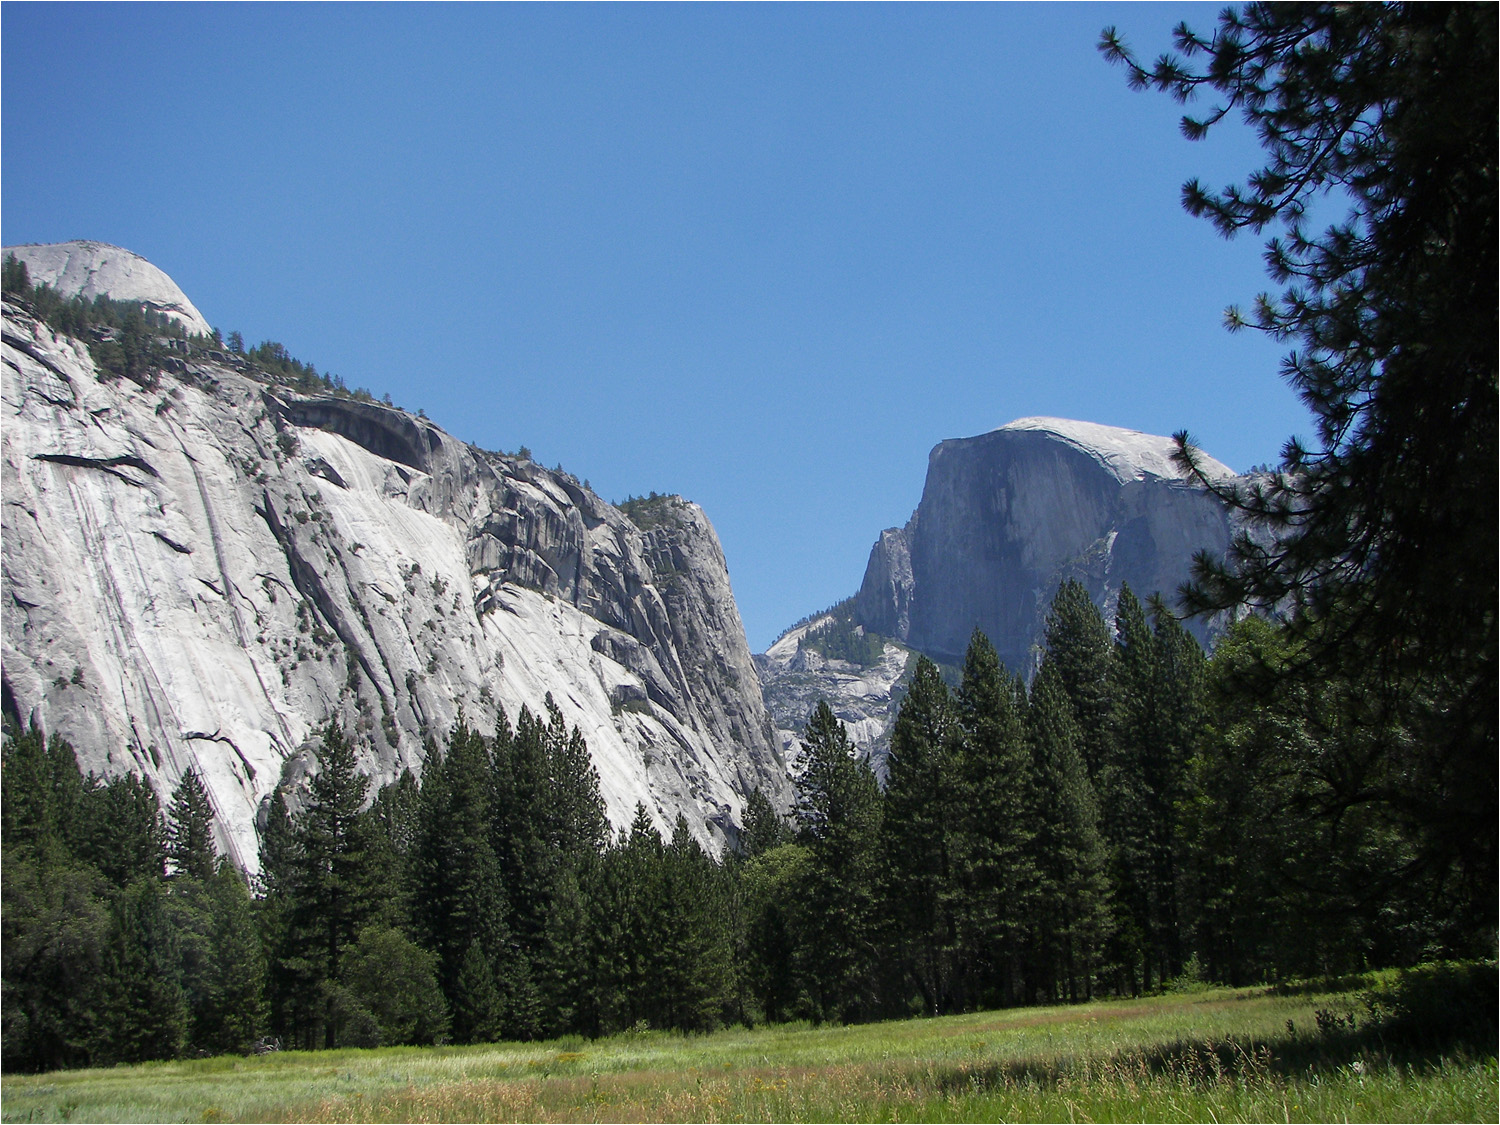 View of Half Dome from Yosemite Valley